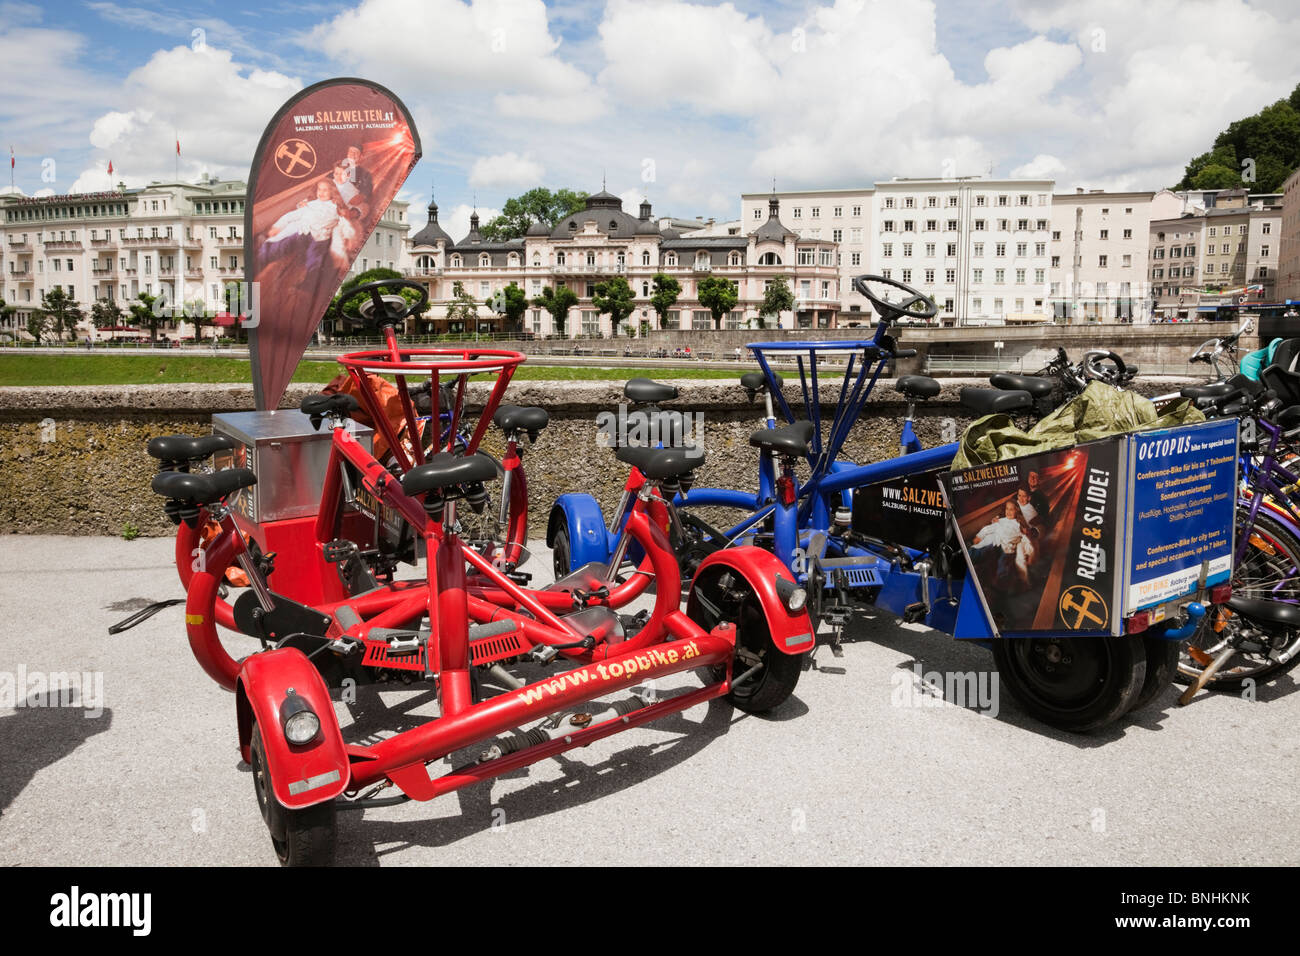 Salzburg, Austria, Europe. Octopus Conference bike and bicycles for hire by Salzach River Stock Photo